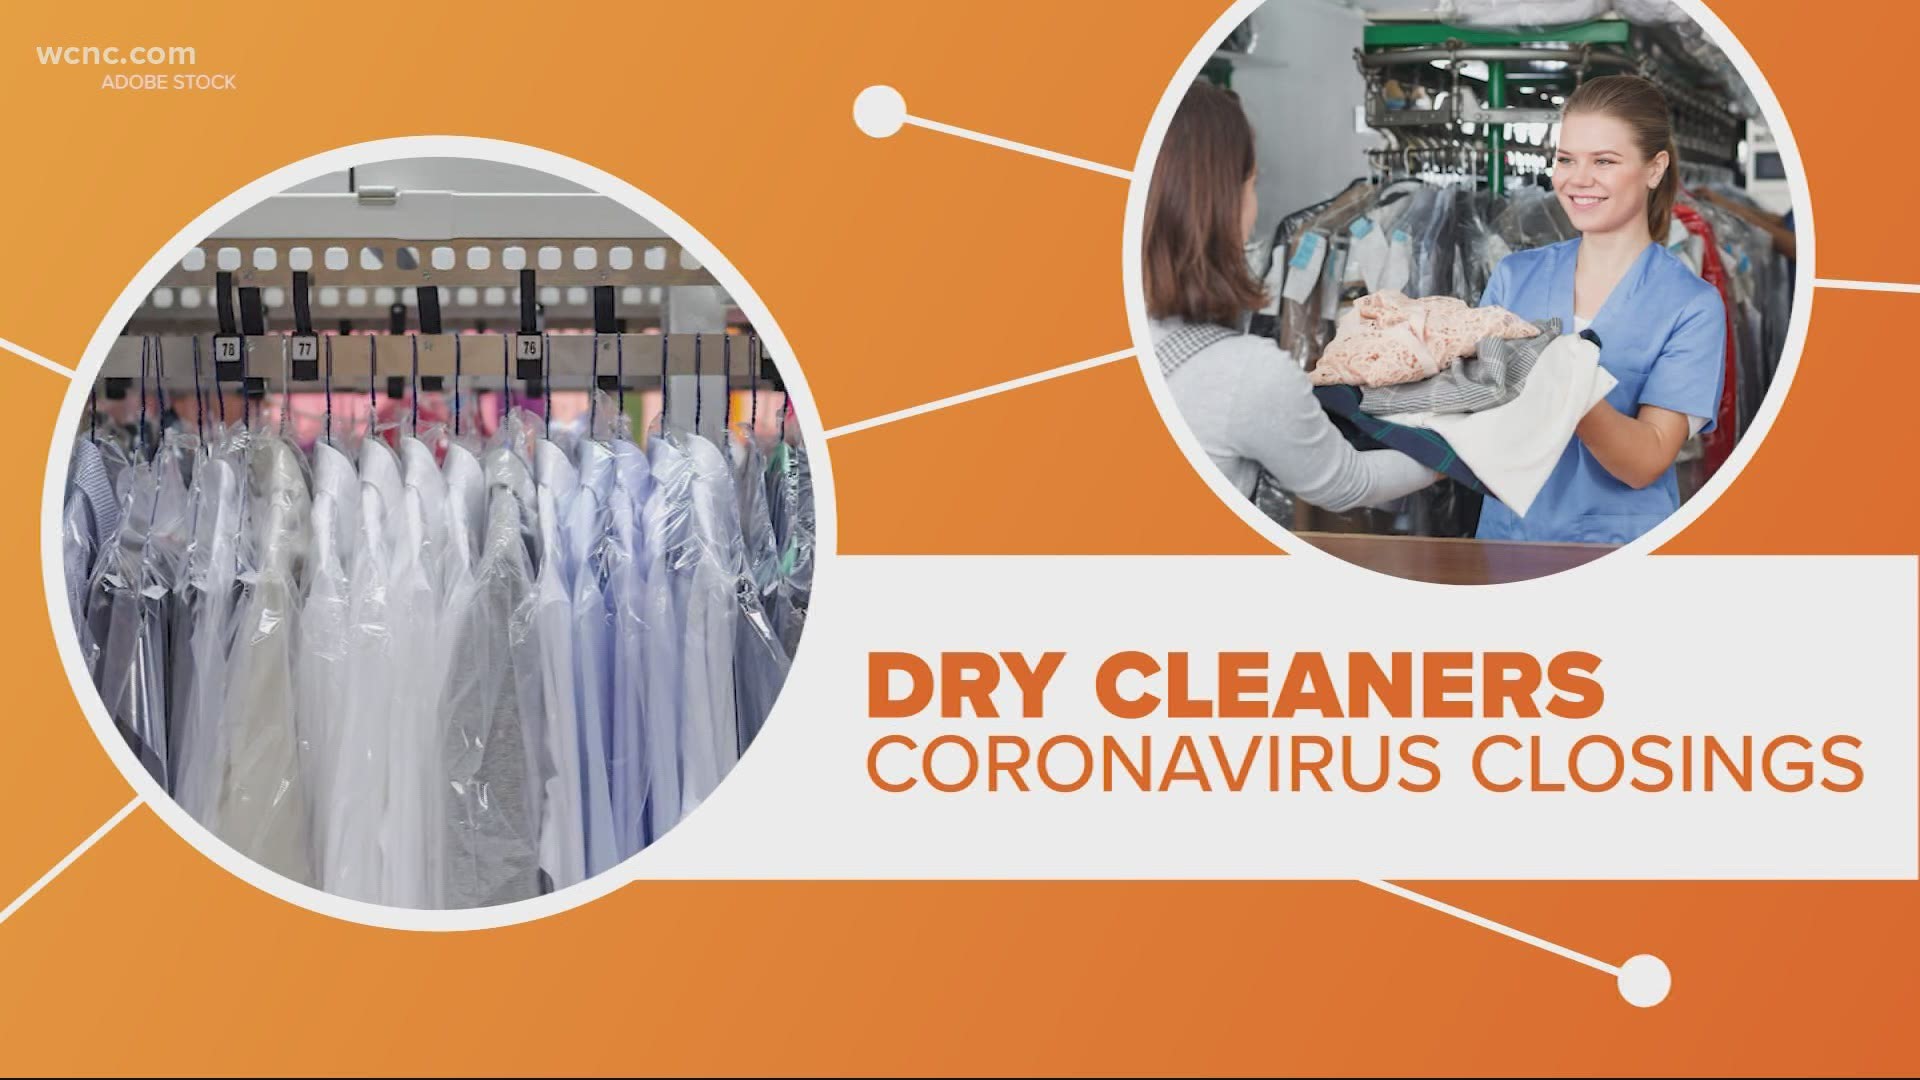 Dry cleaners have been on the decline for some time, but the COVID-19 pandemic might be the final nail in the coffin for the industry.